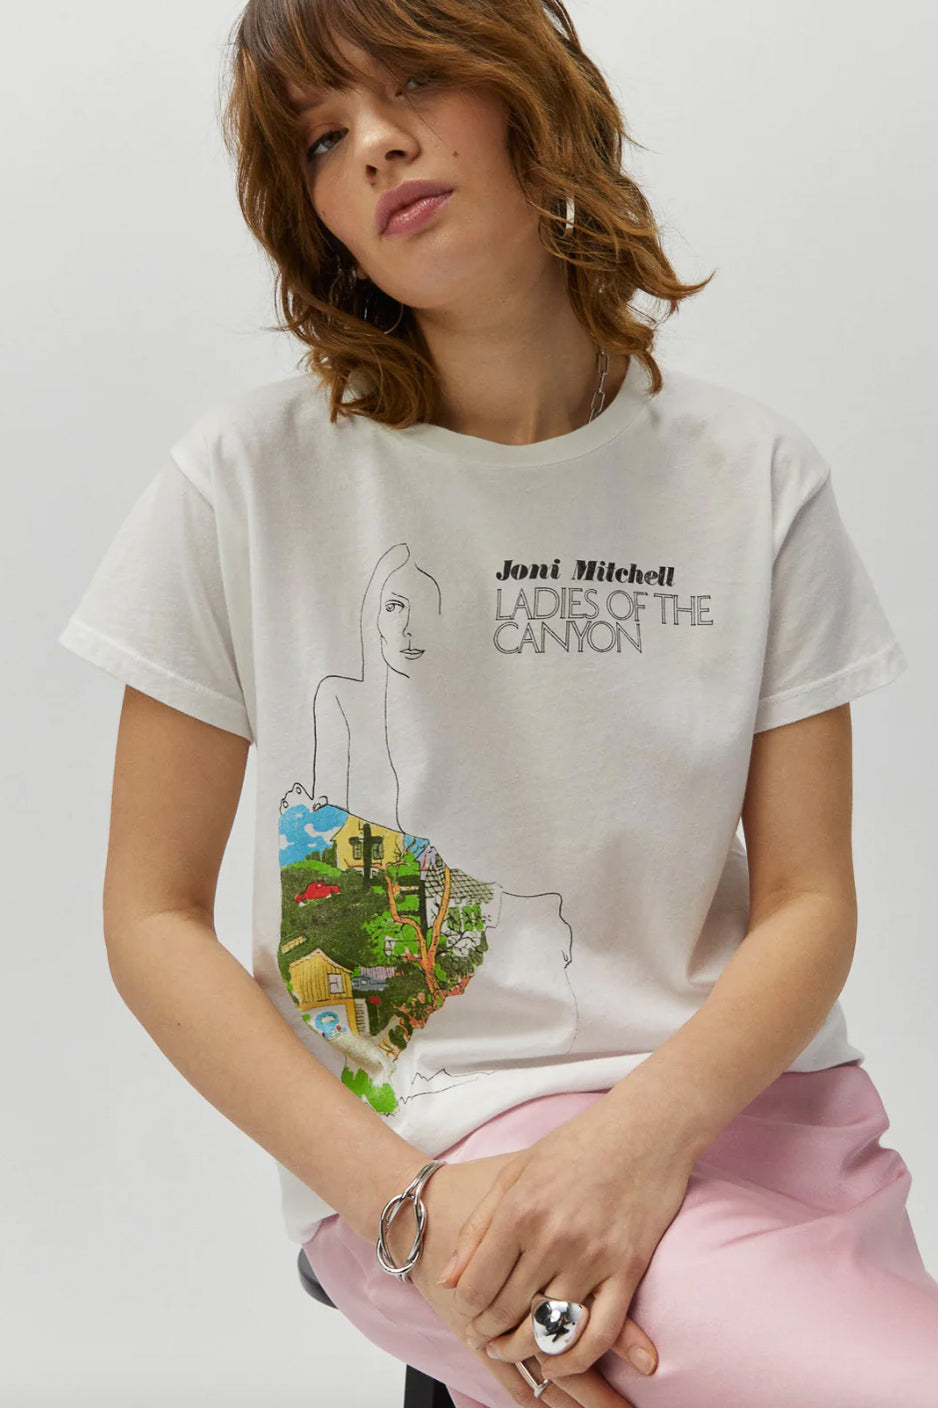 Joni Mitchell Ladies Of The Canyon Tee - The Canyon